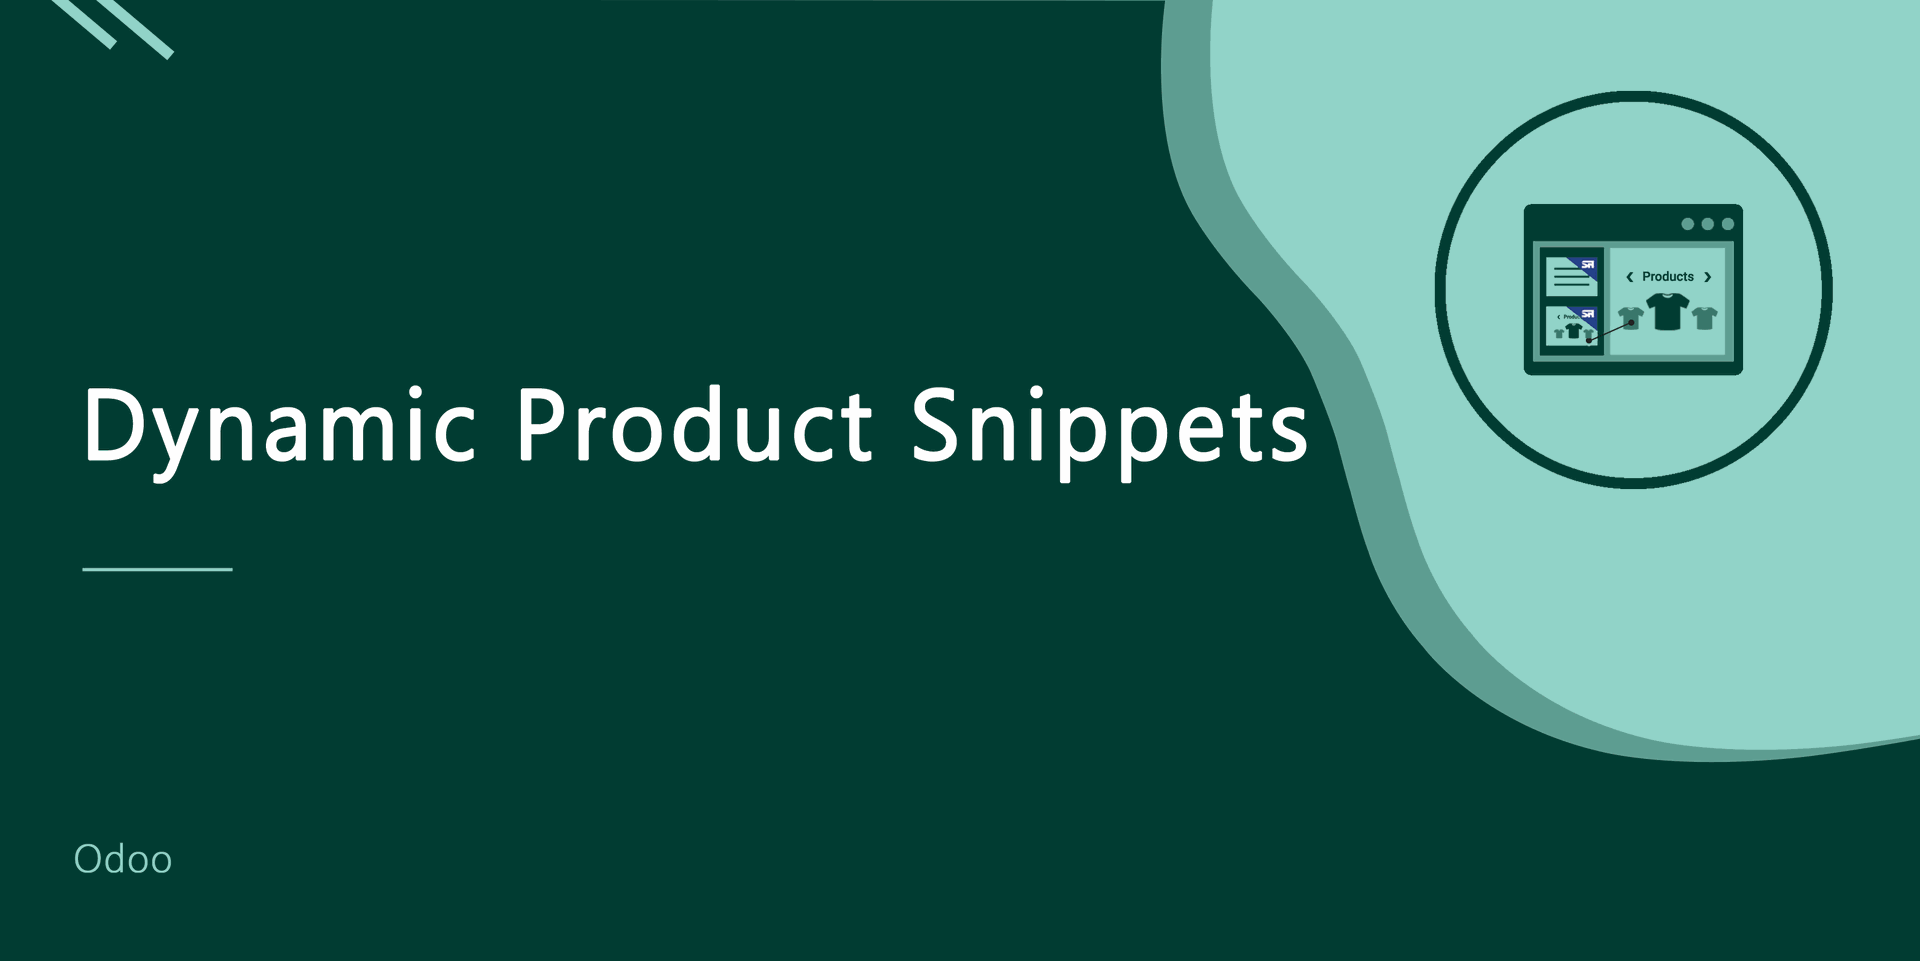 Dynamic Product Snippets